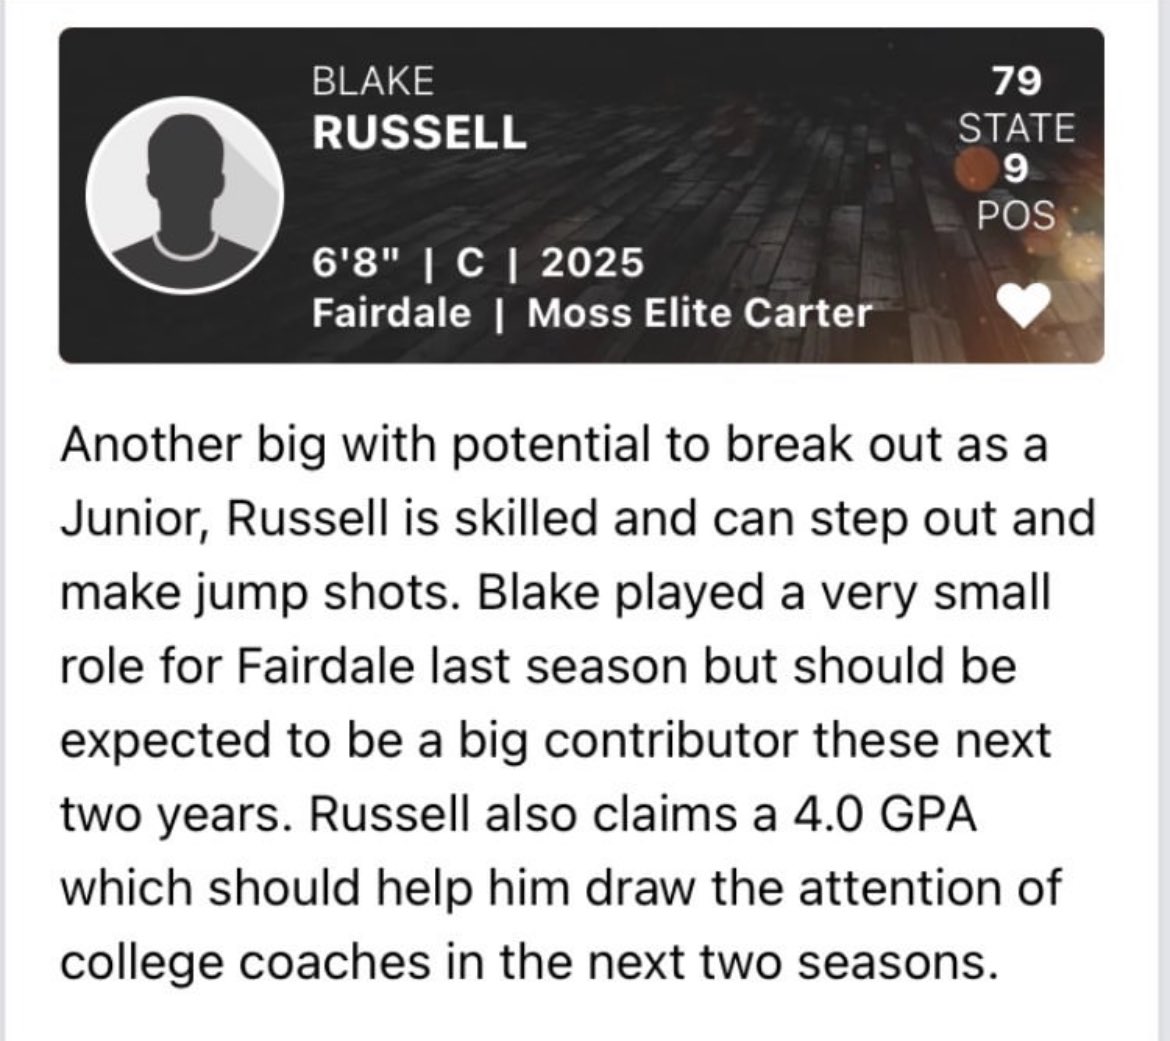 Ranked 79 in 2025 and 9th as a 2025 forward expect this to go up after this season 💯 @Dawgs_Athletics @John_Hunt12 @FHSBasketball11 #protectthebrand